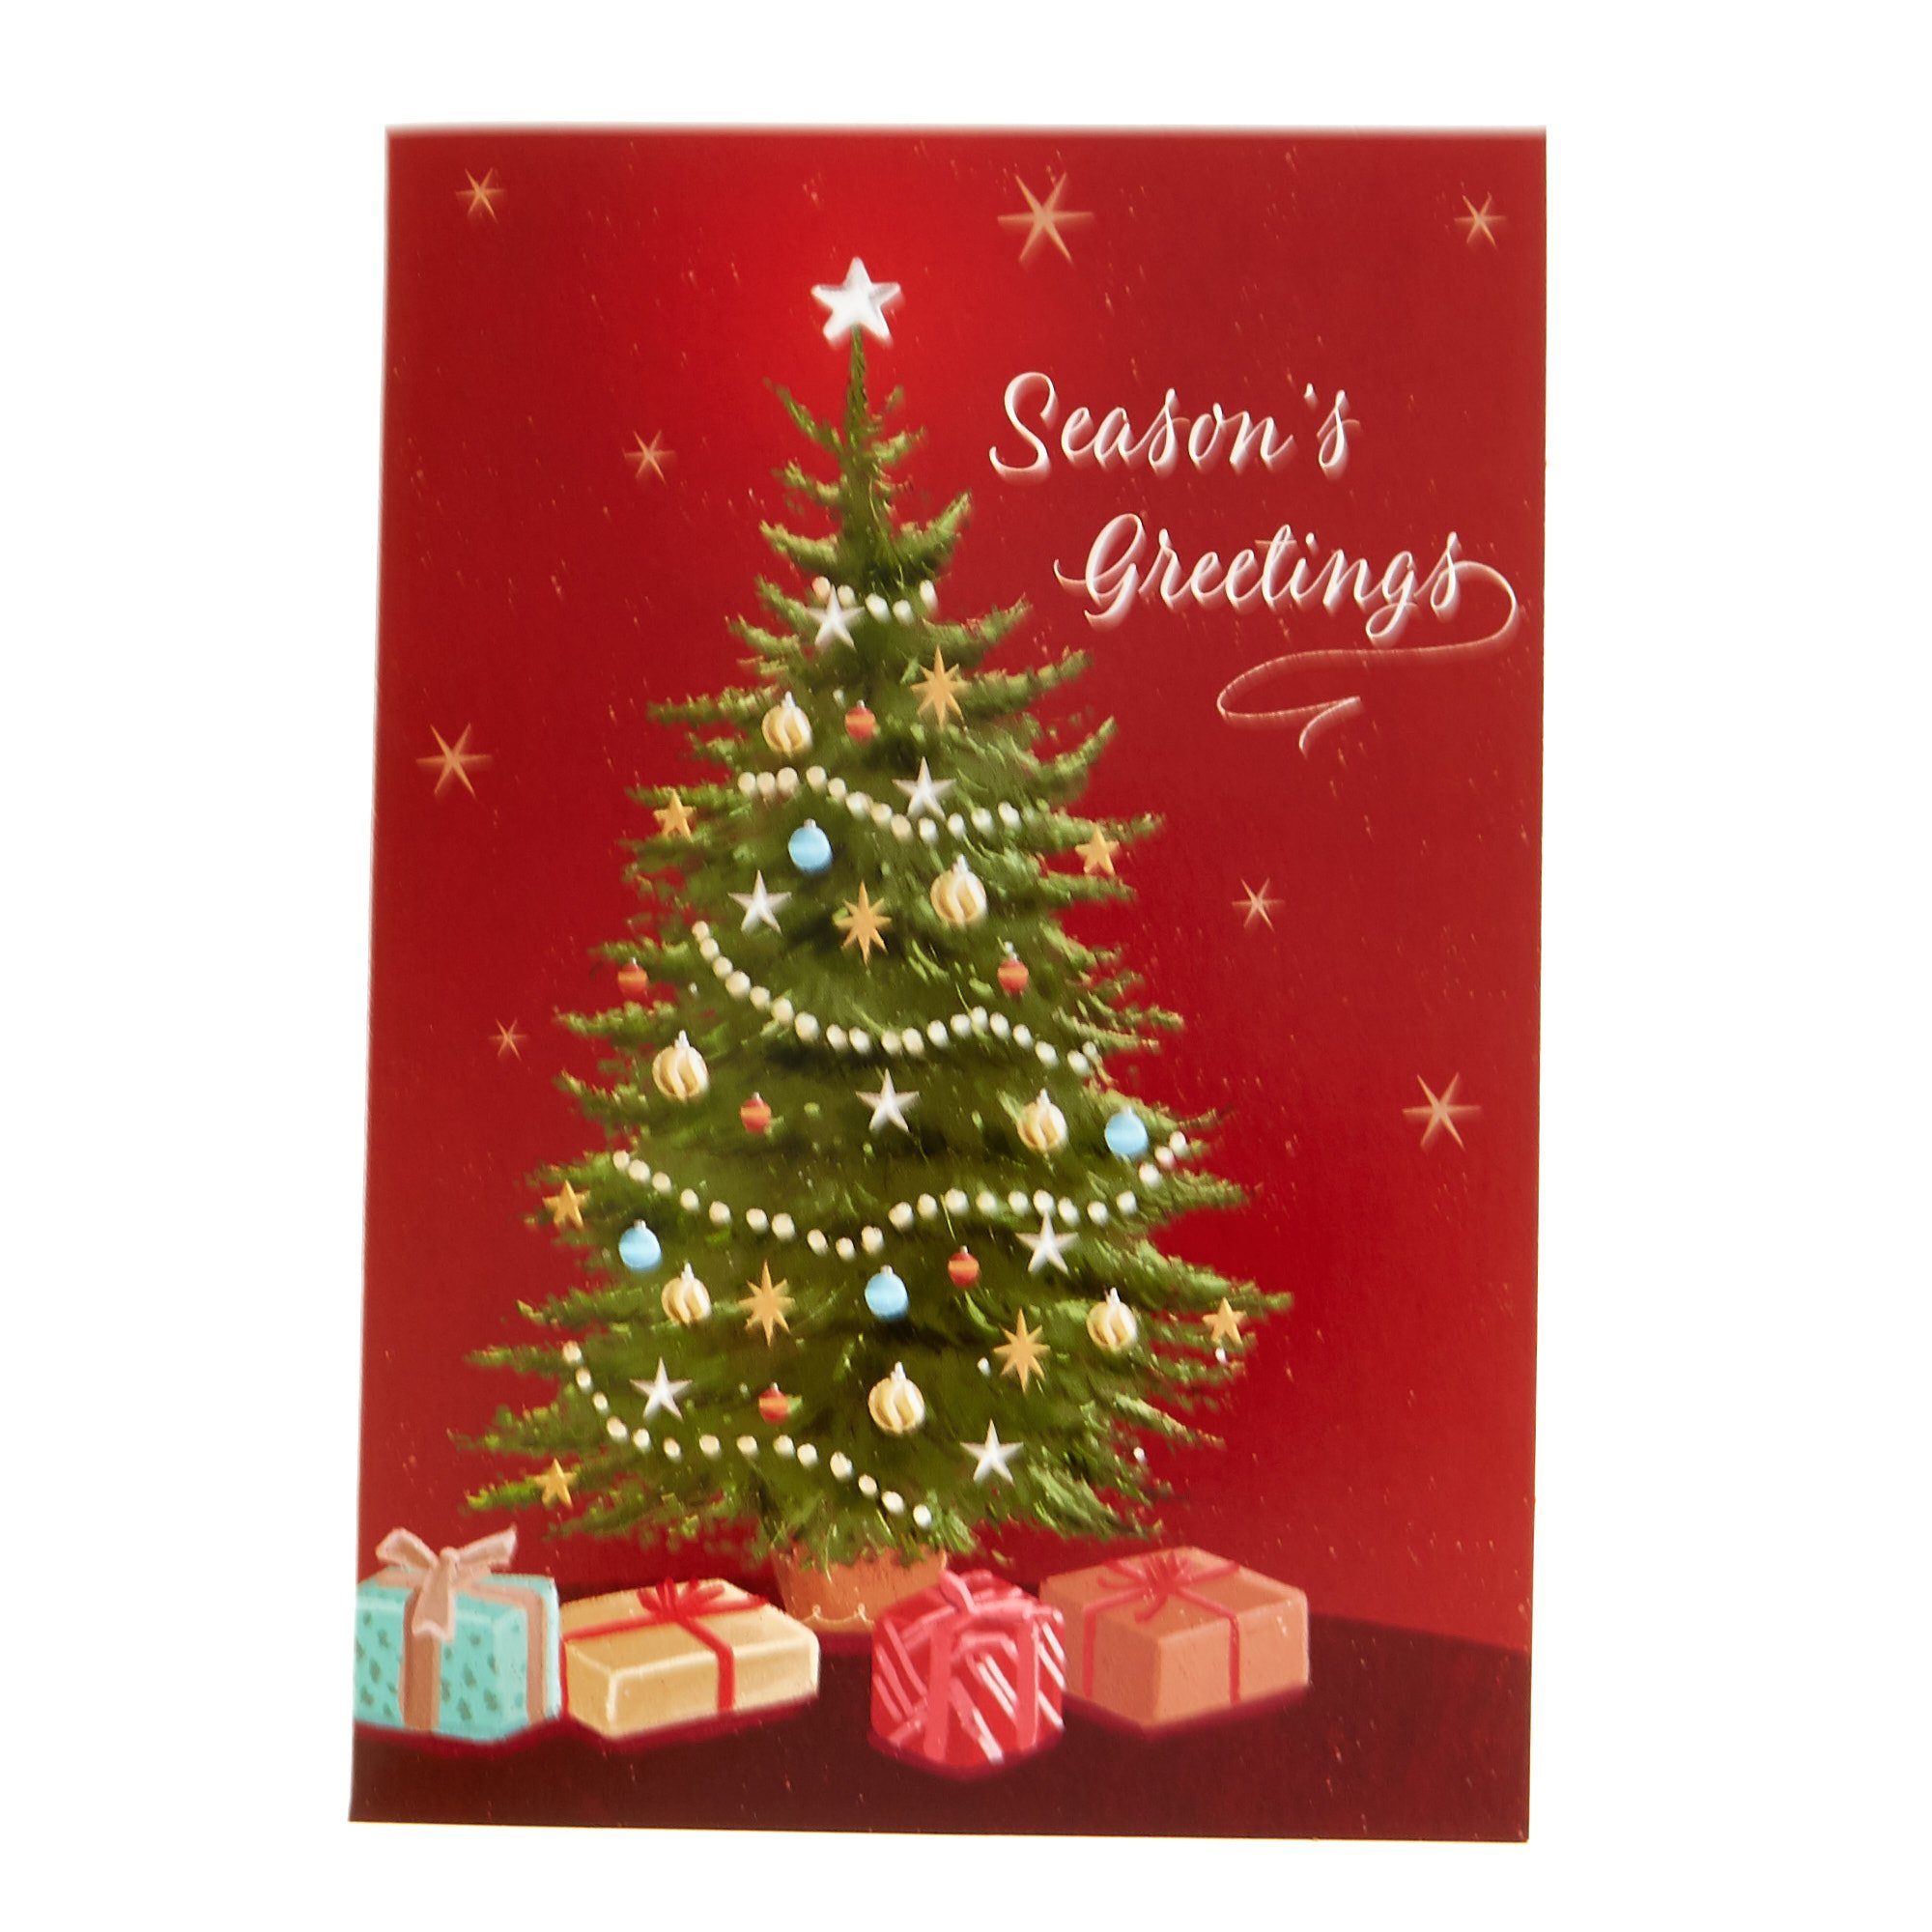 Buy 50 Bumper Value Christmas Cards 10 Designs For Gbp 1 99 Card Factory Uk